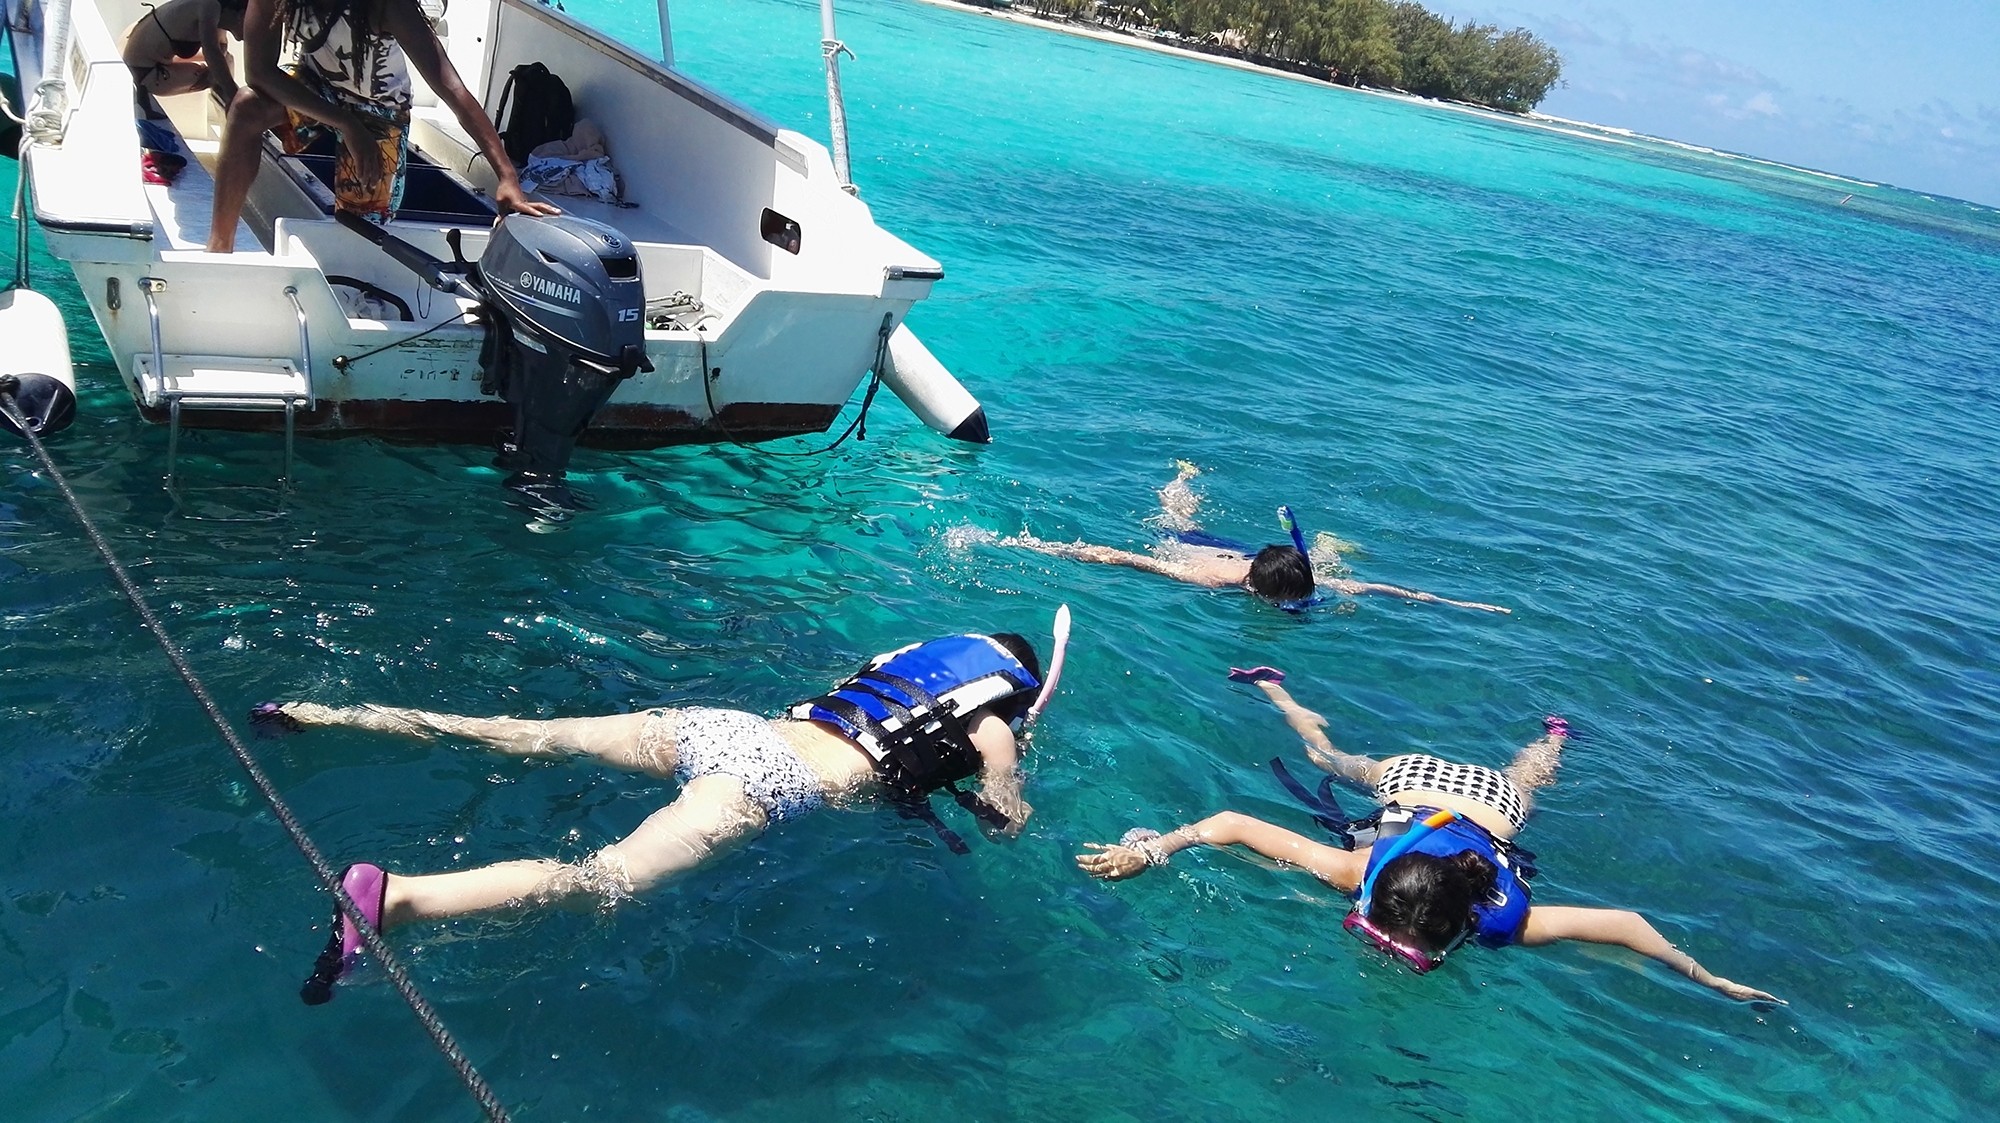 GLASS BOTTOM & SNORKELING EXPERIENCE AT BLUE BAY